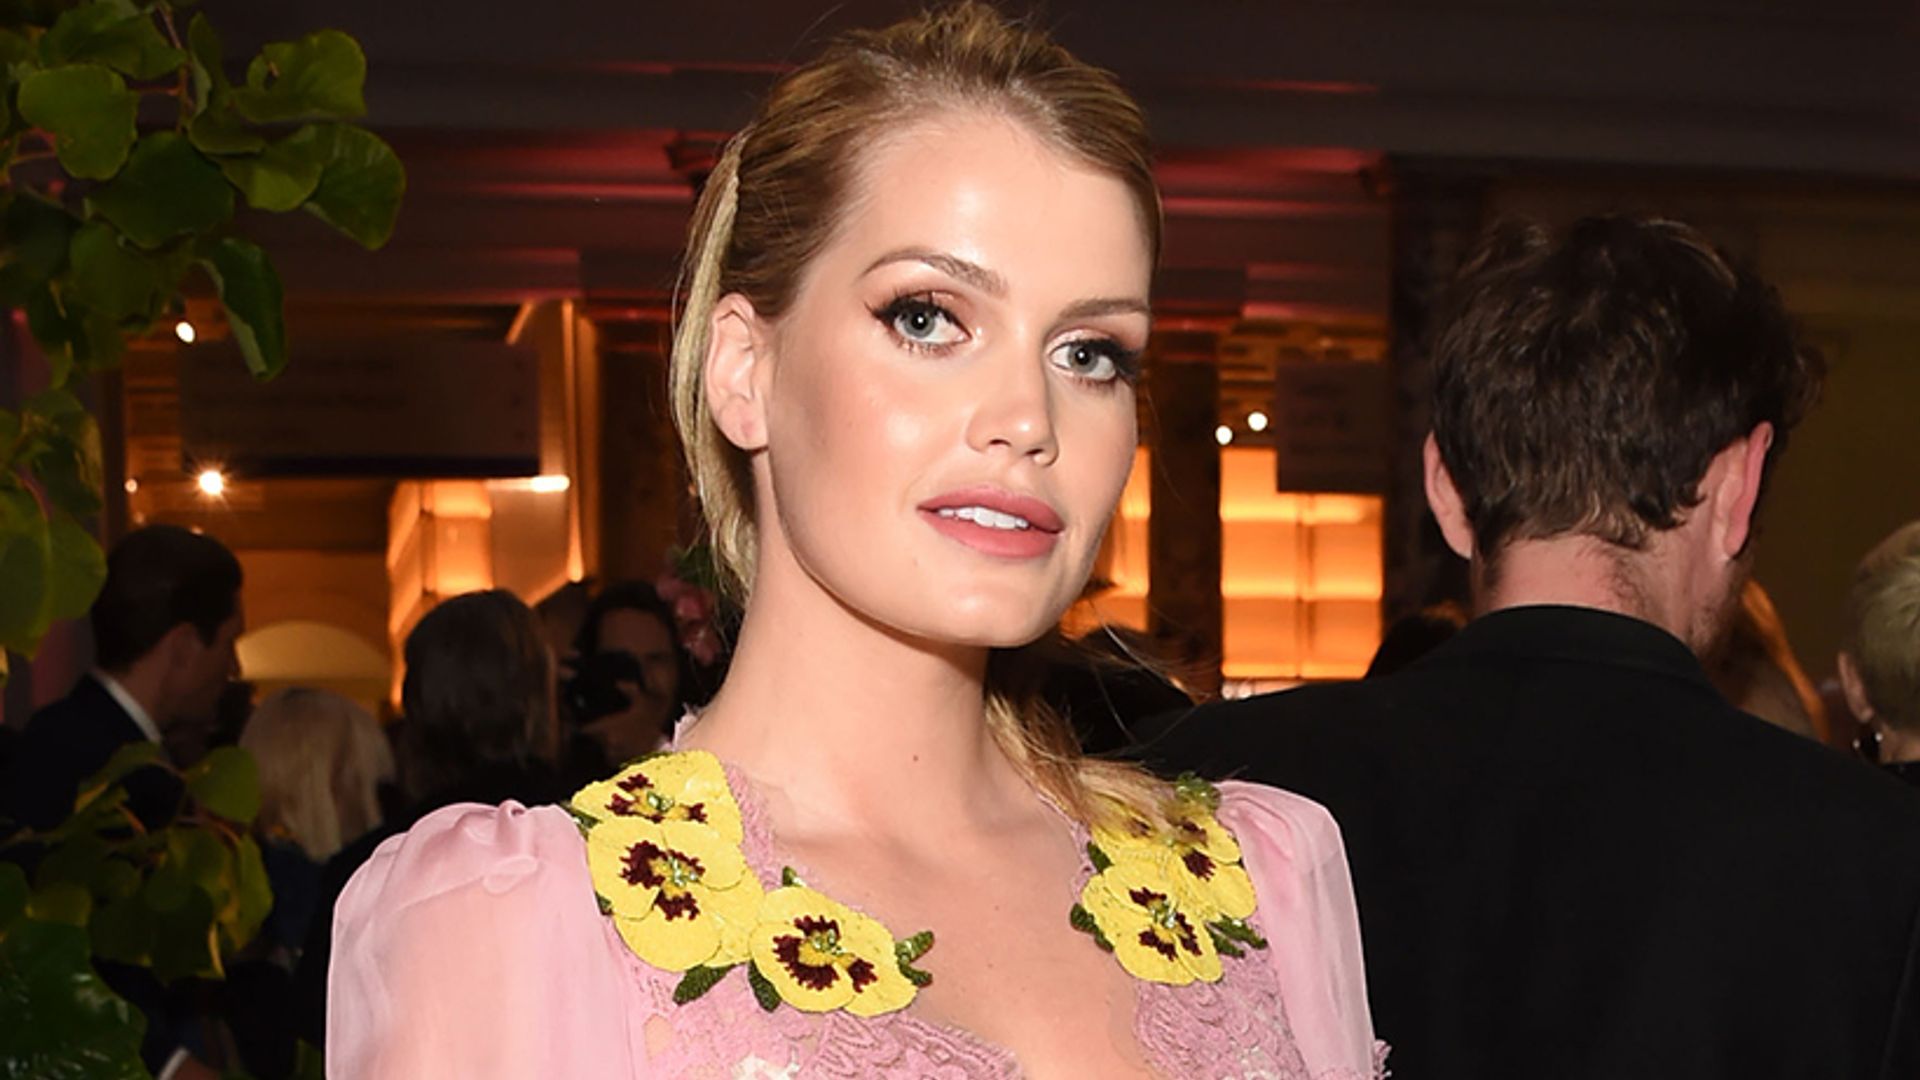 Lady Kitty Spencer just wore a very sheer dress (and it's stunning!)